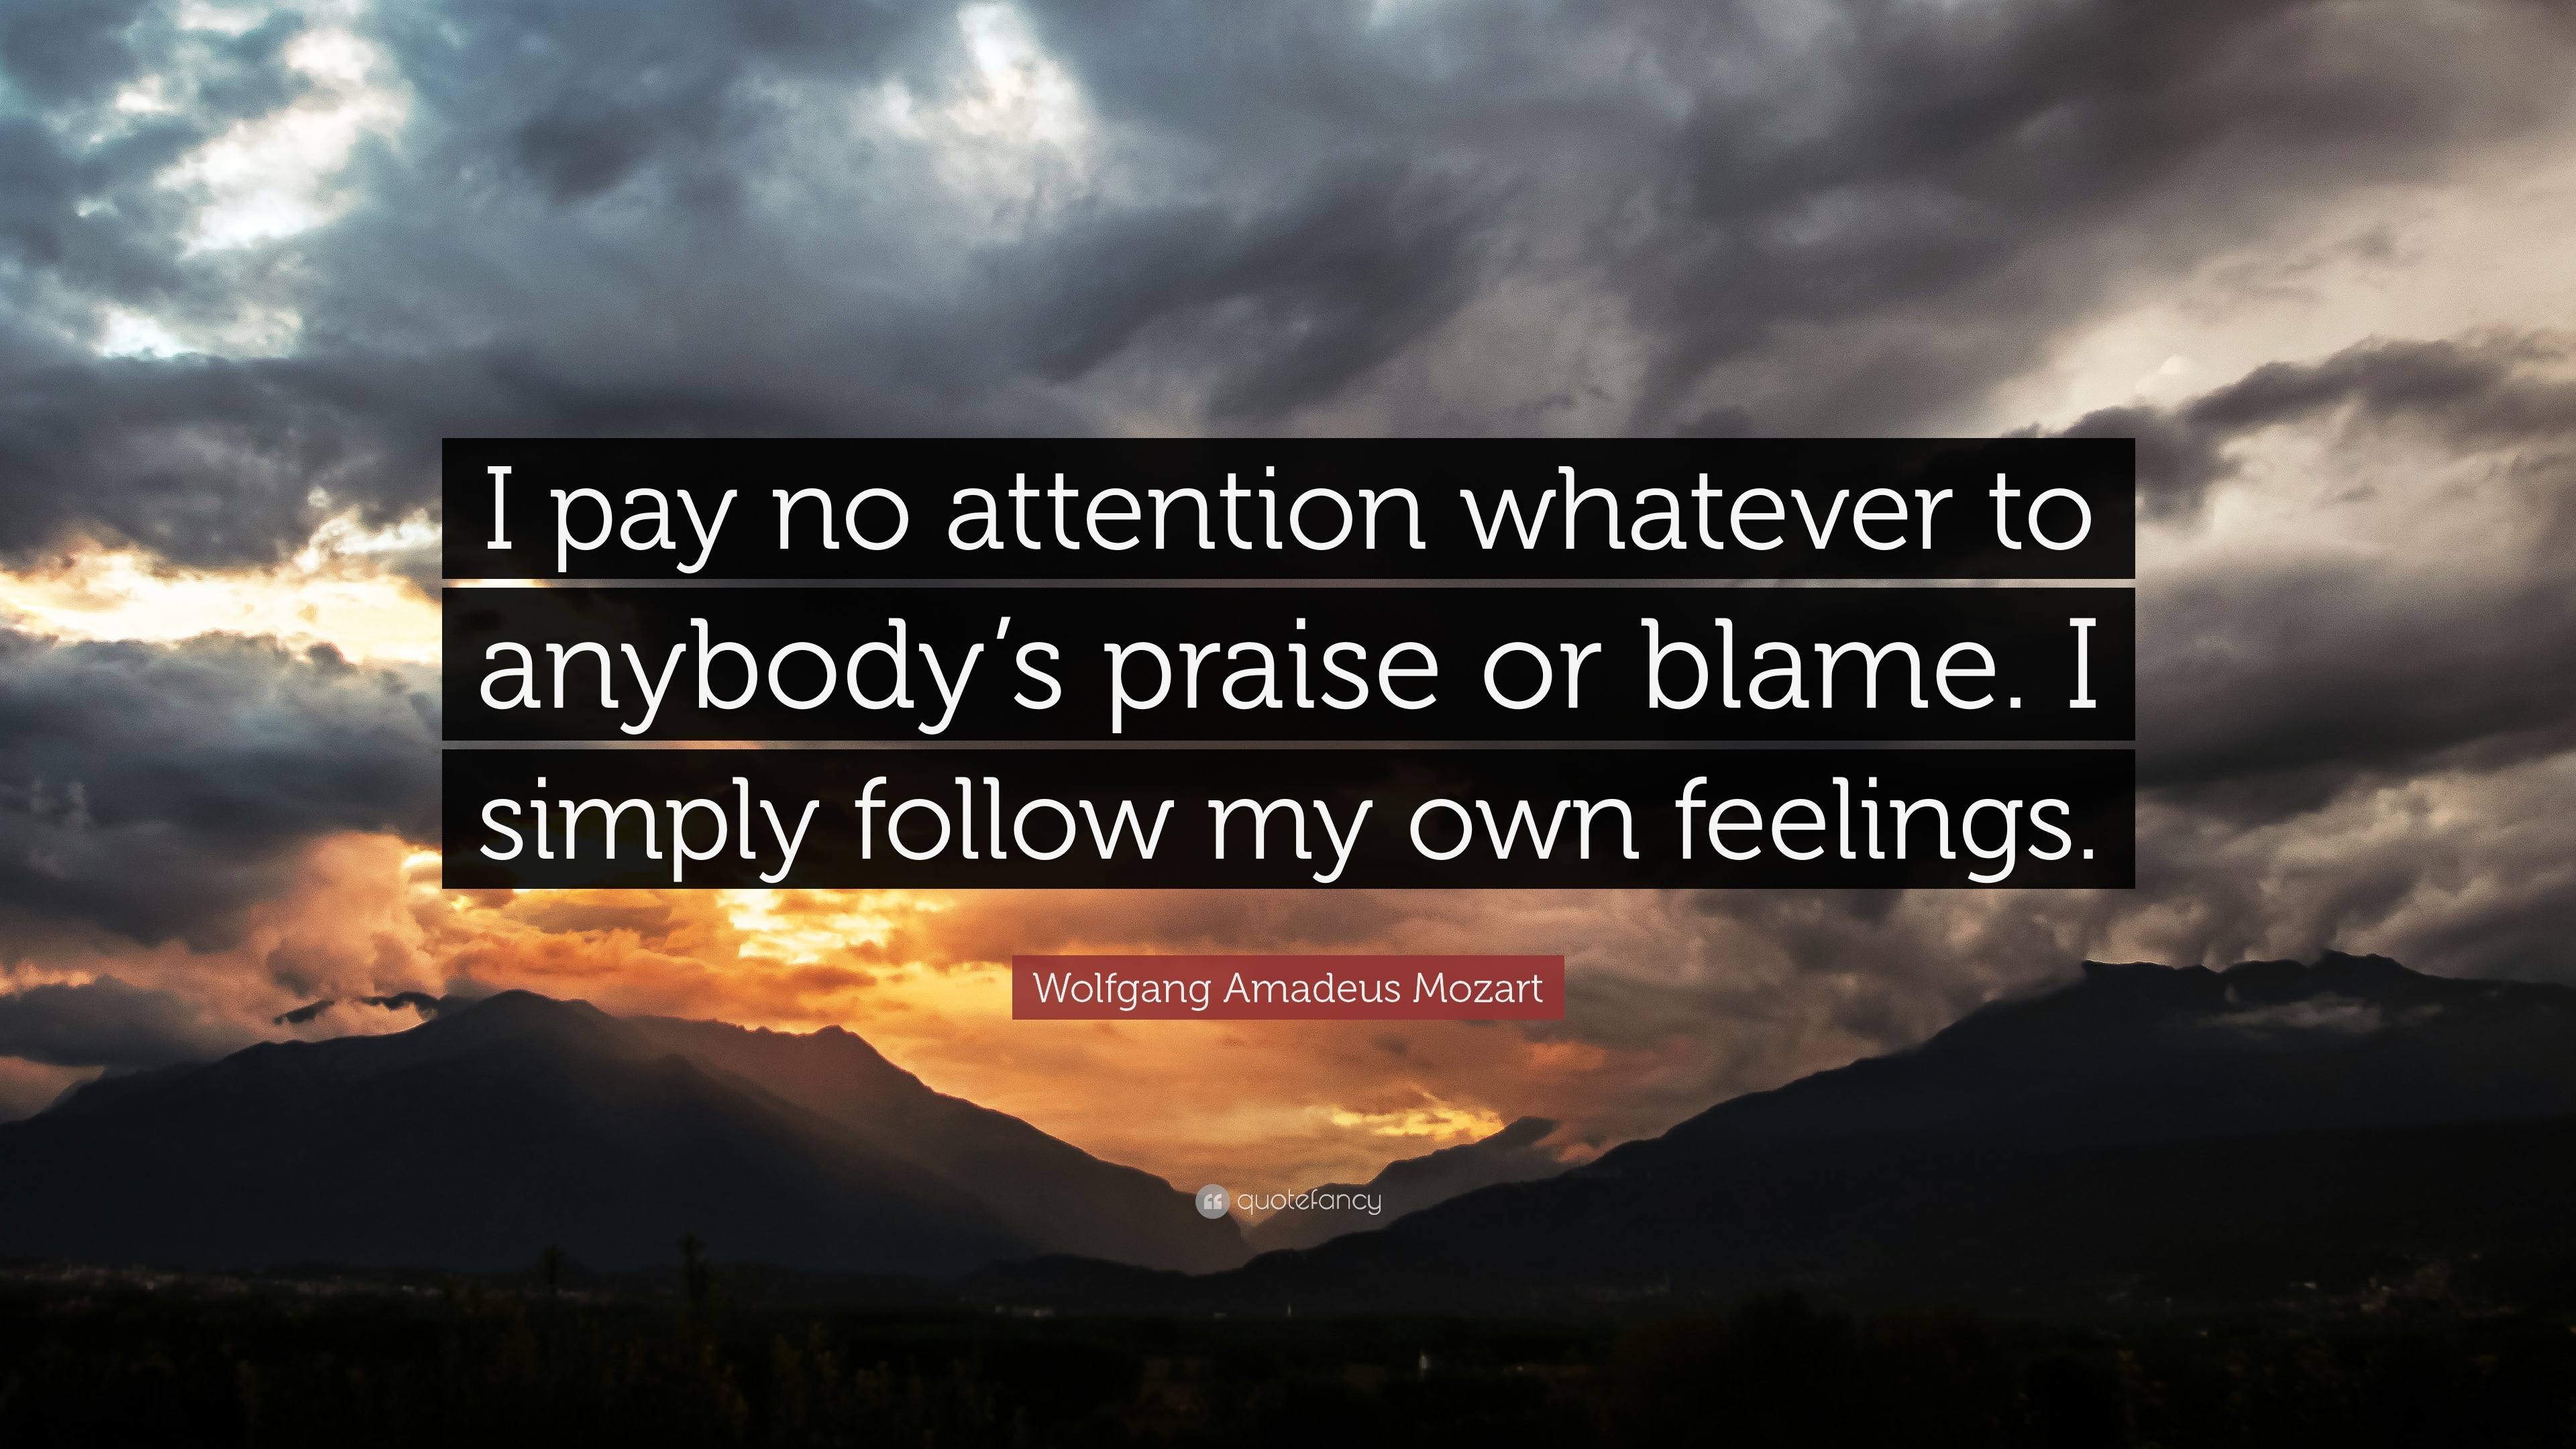 Wolfgang Amadeus Mozart Quote: “I pay no attention whatever to anybody ...